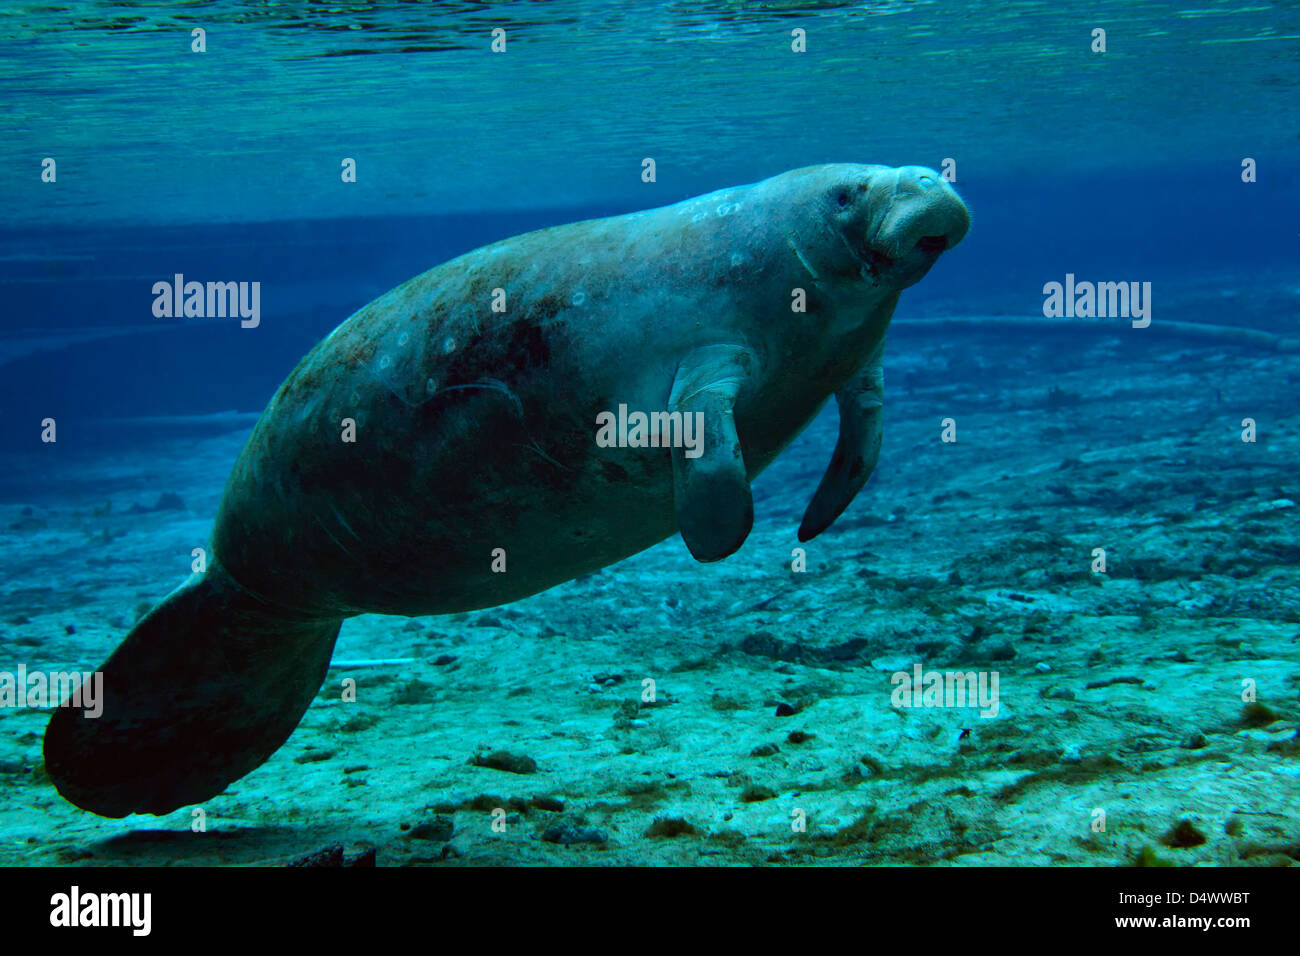 A West Indian Manatee surfacing in the shallow clear freshwaters of Fanning Springs, a state park in northeast Florida. Stock Photo